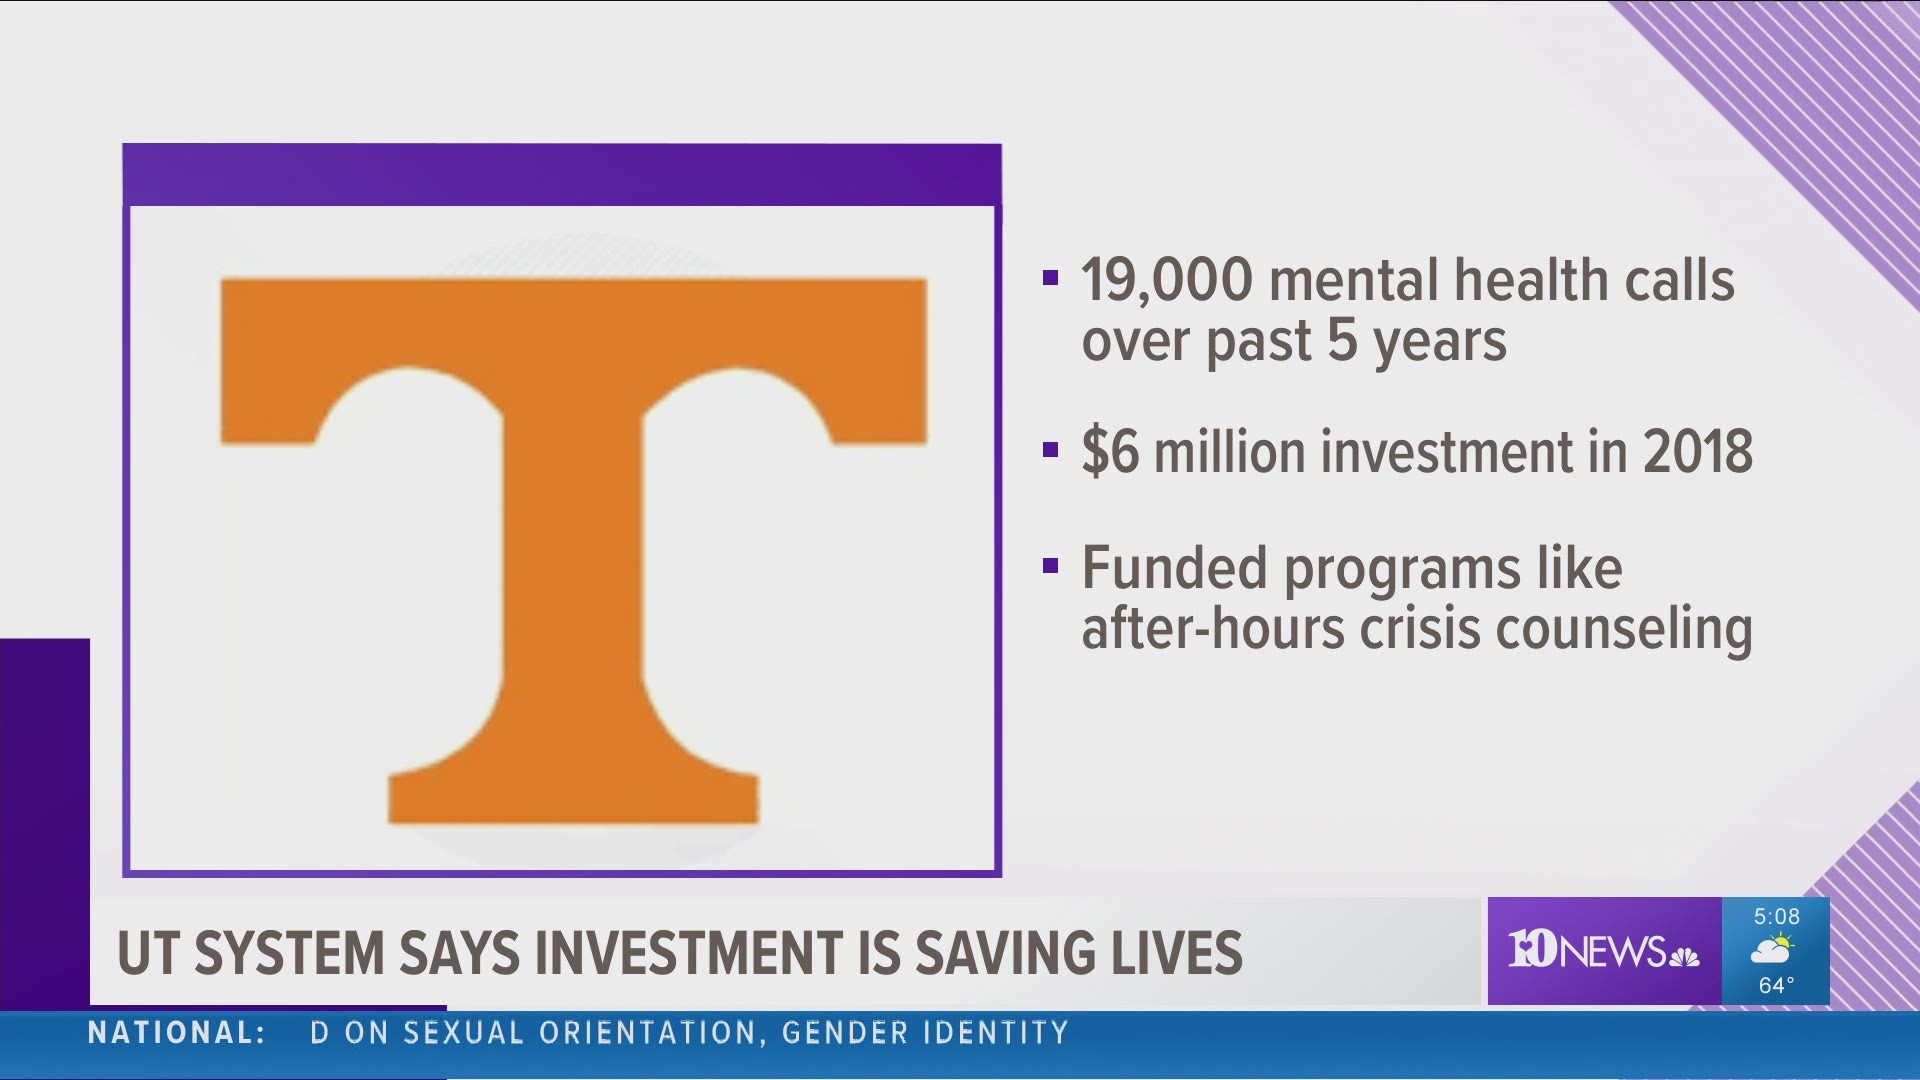 The University of Tennessee System said its $6 million investment in mental health services is saving lives.